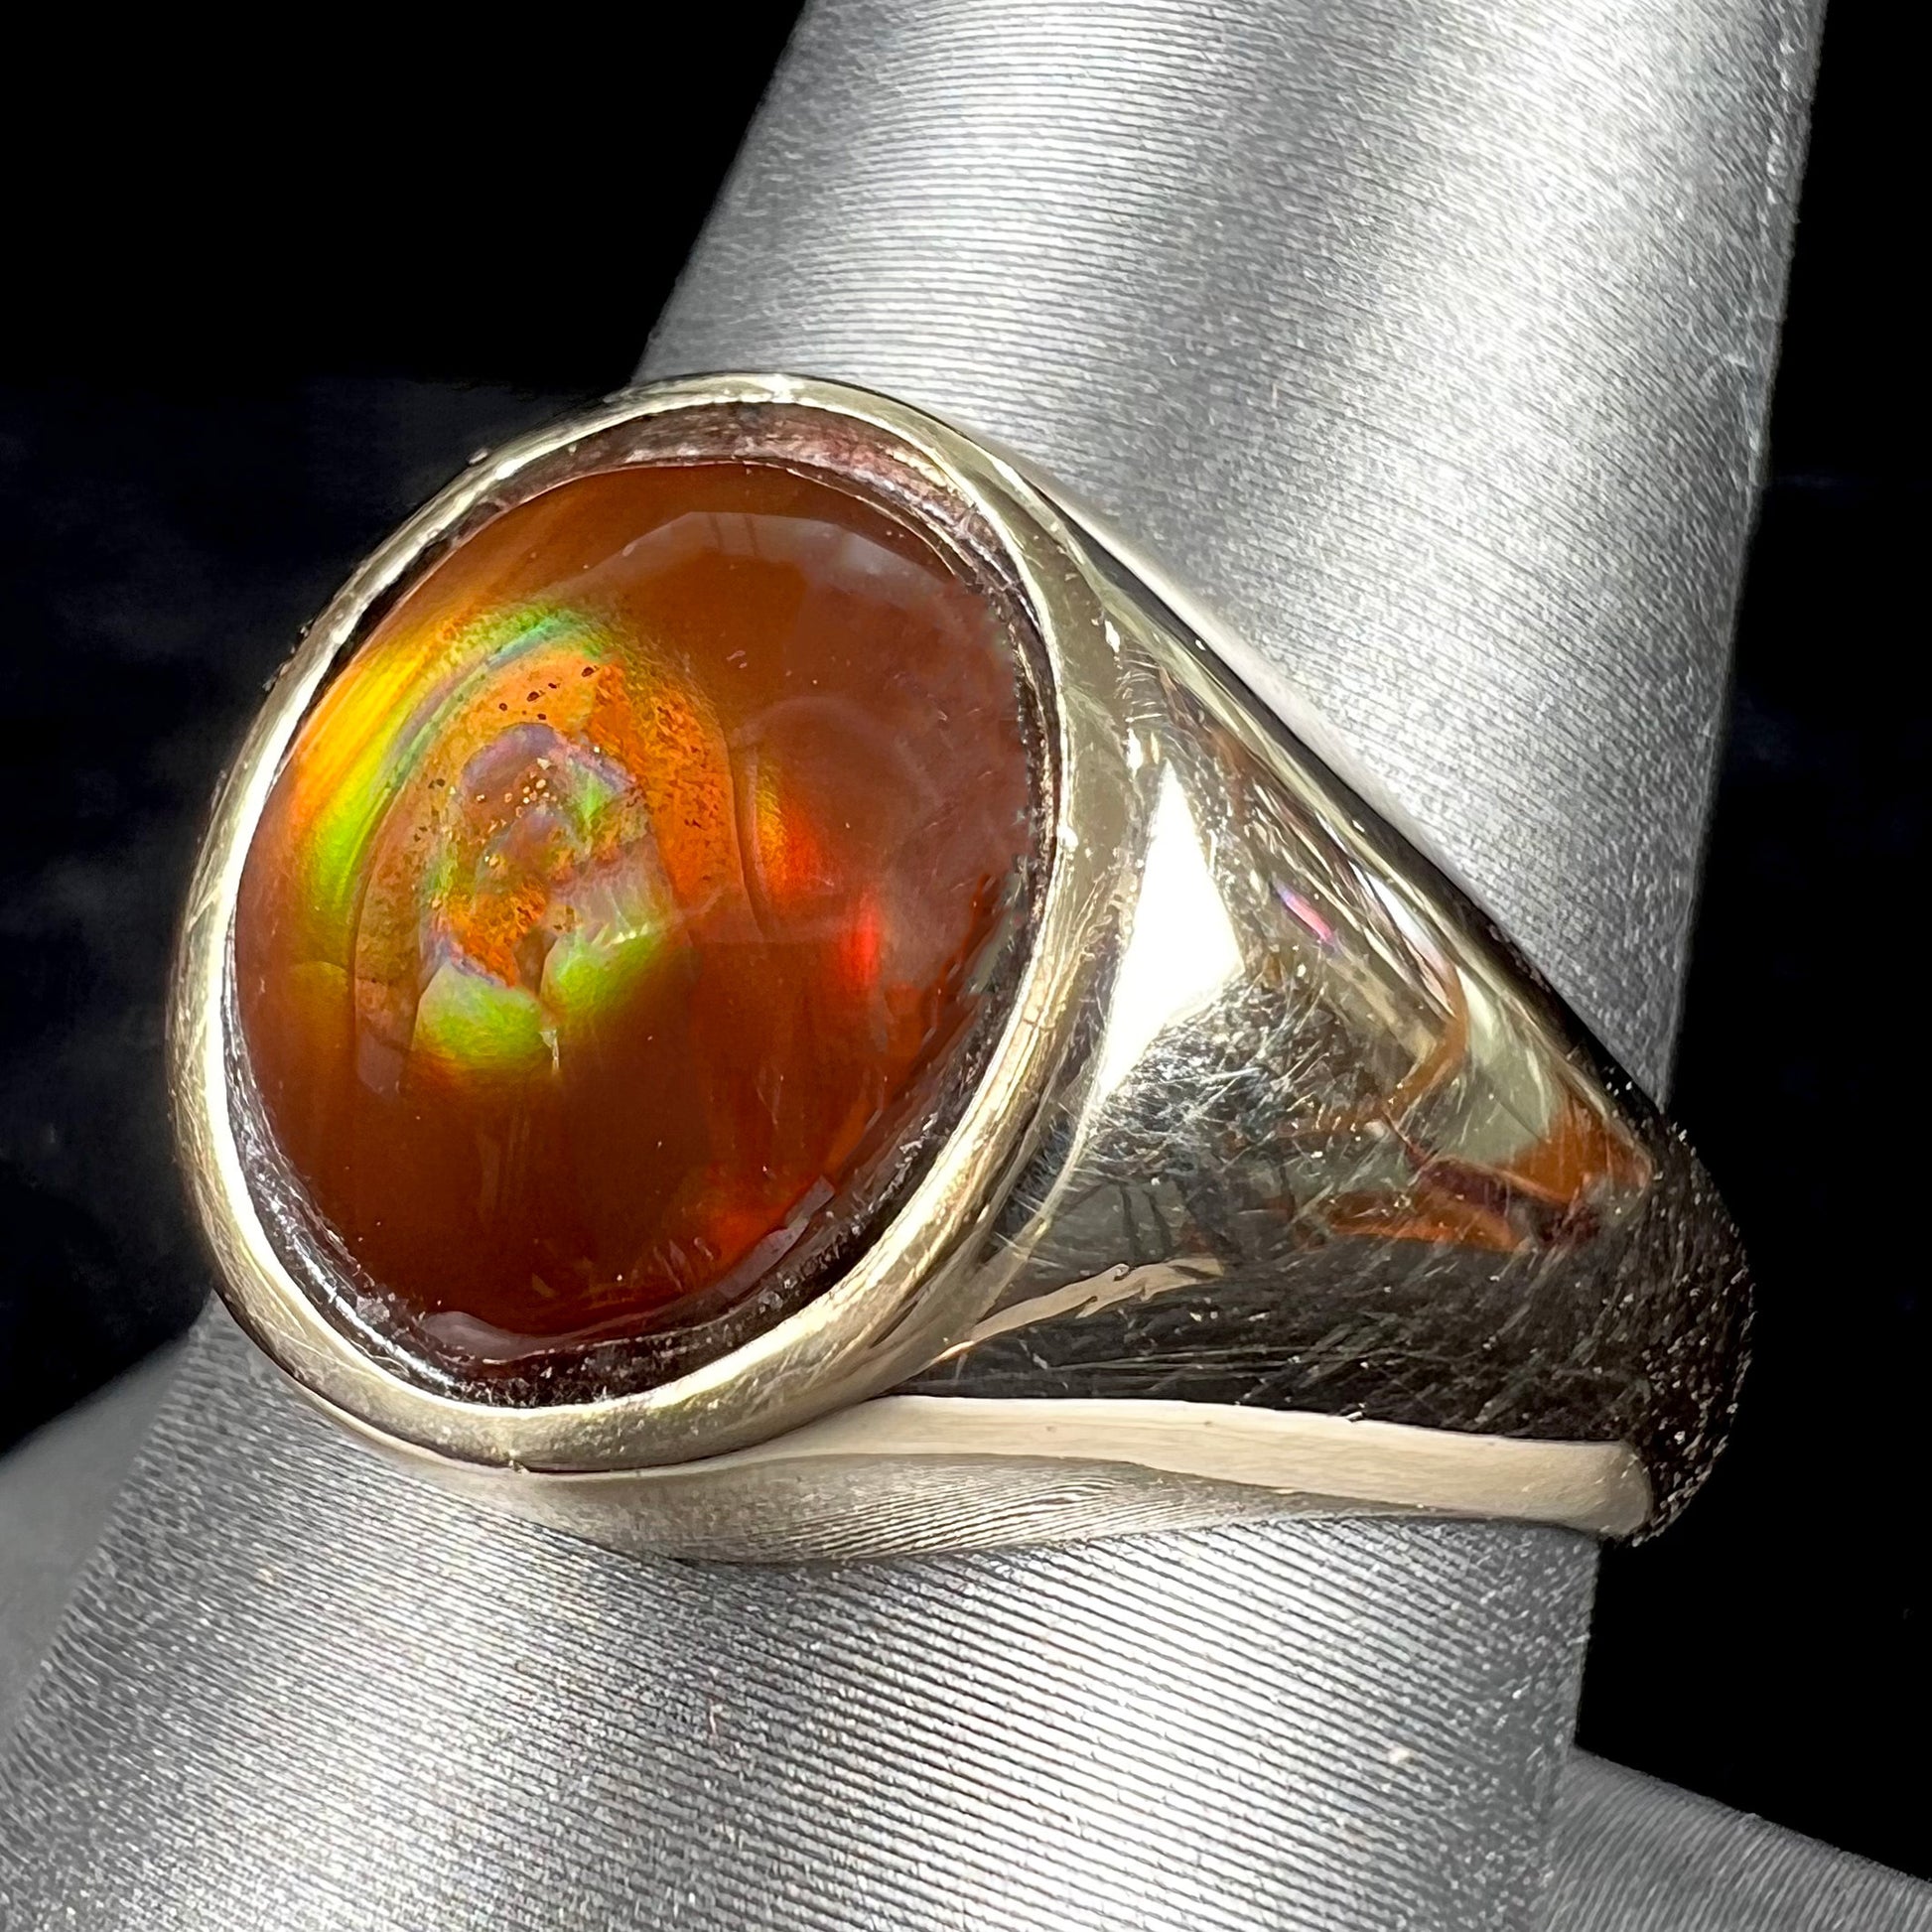 A unisex yellow gold flush set fire agate solitaire ring.